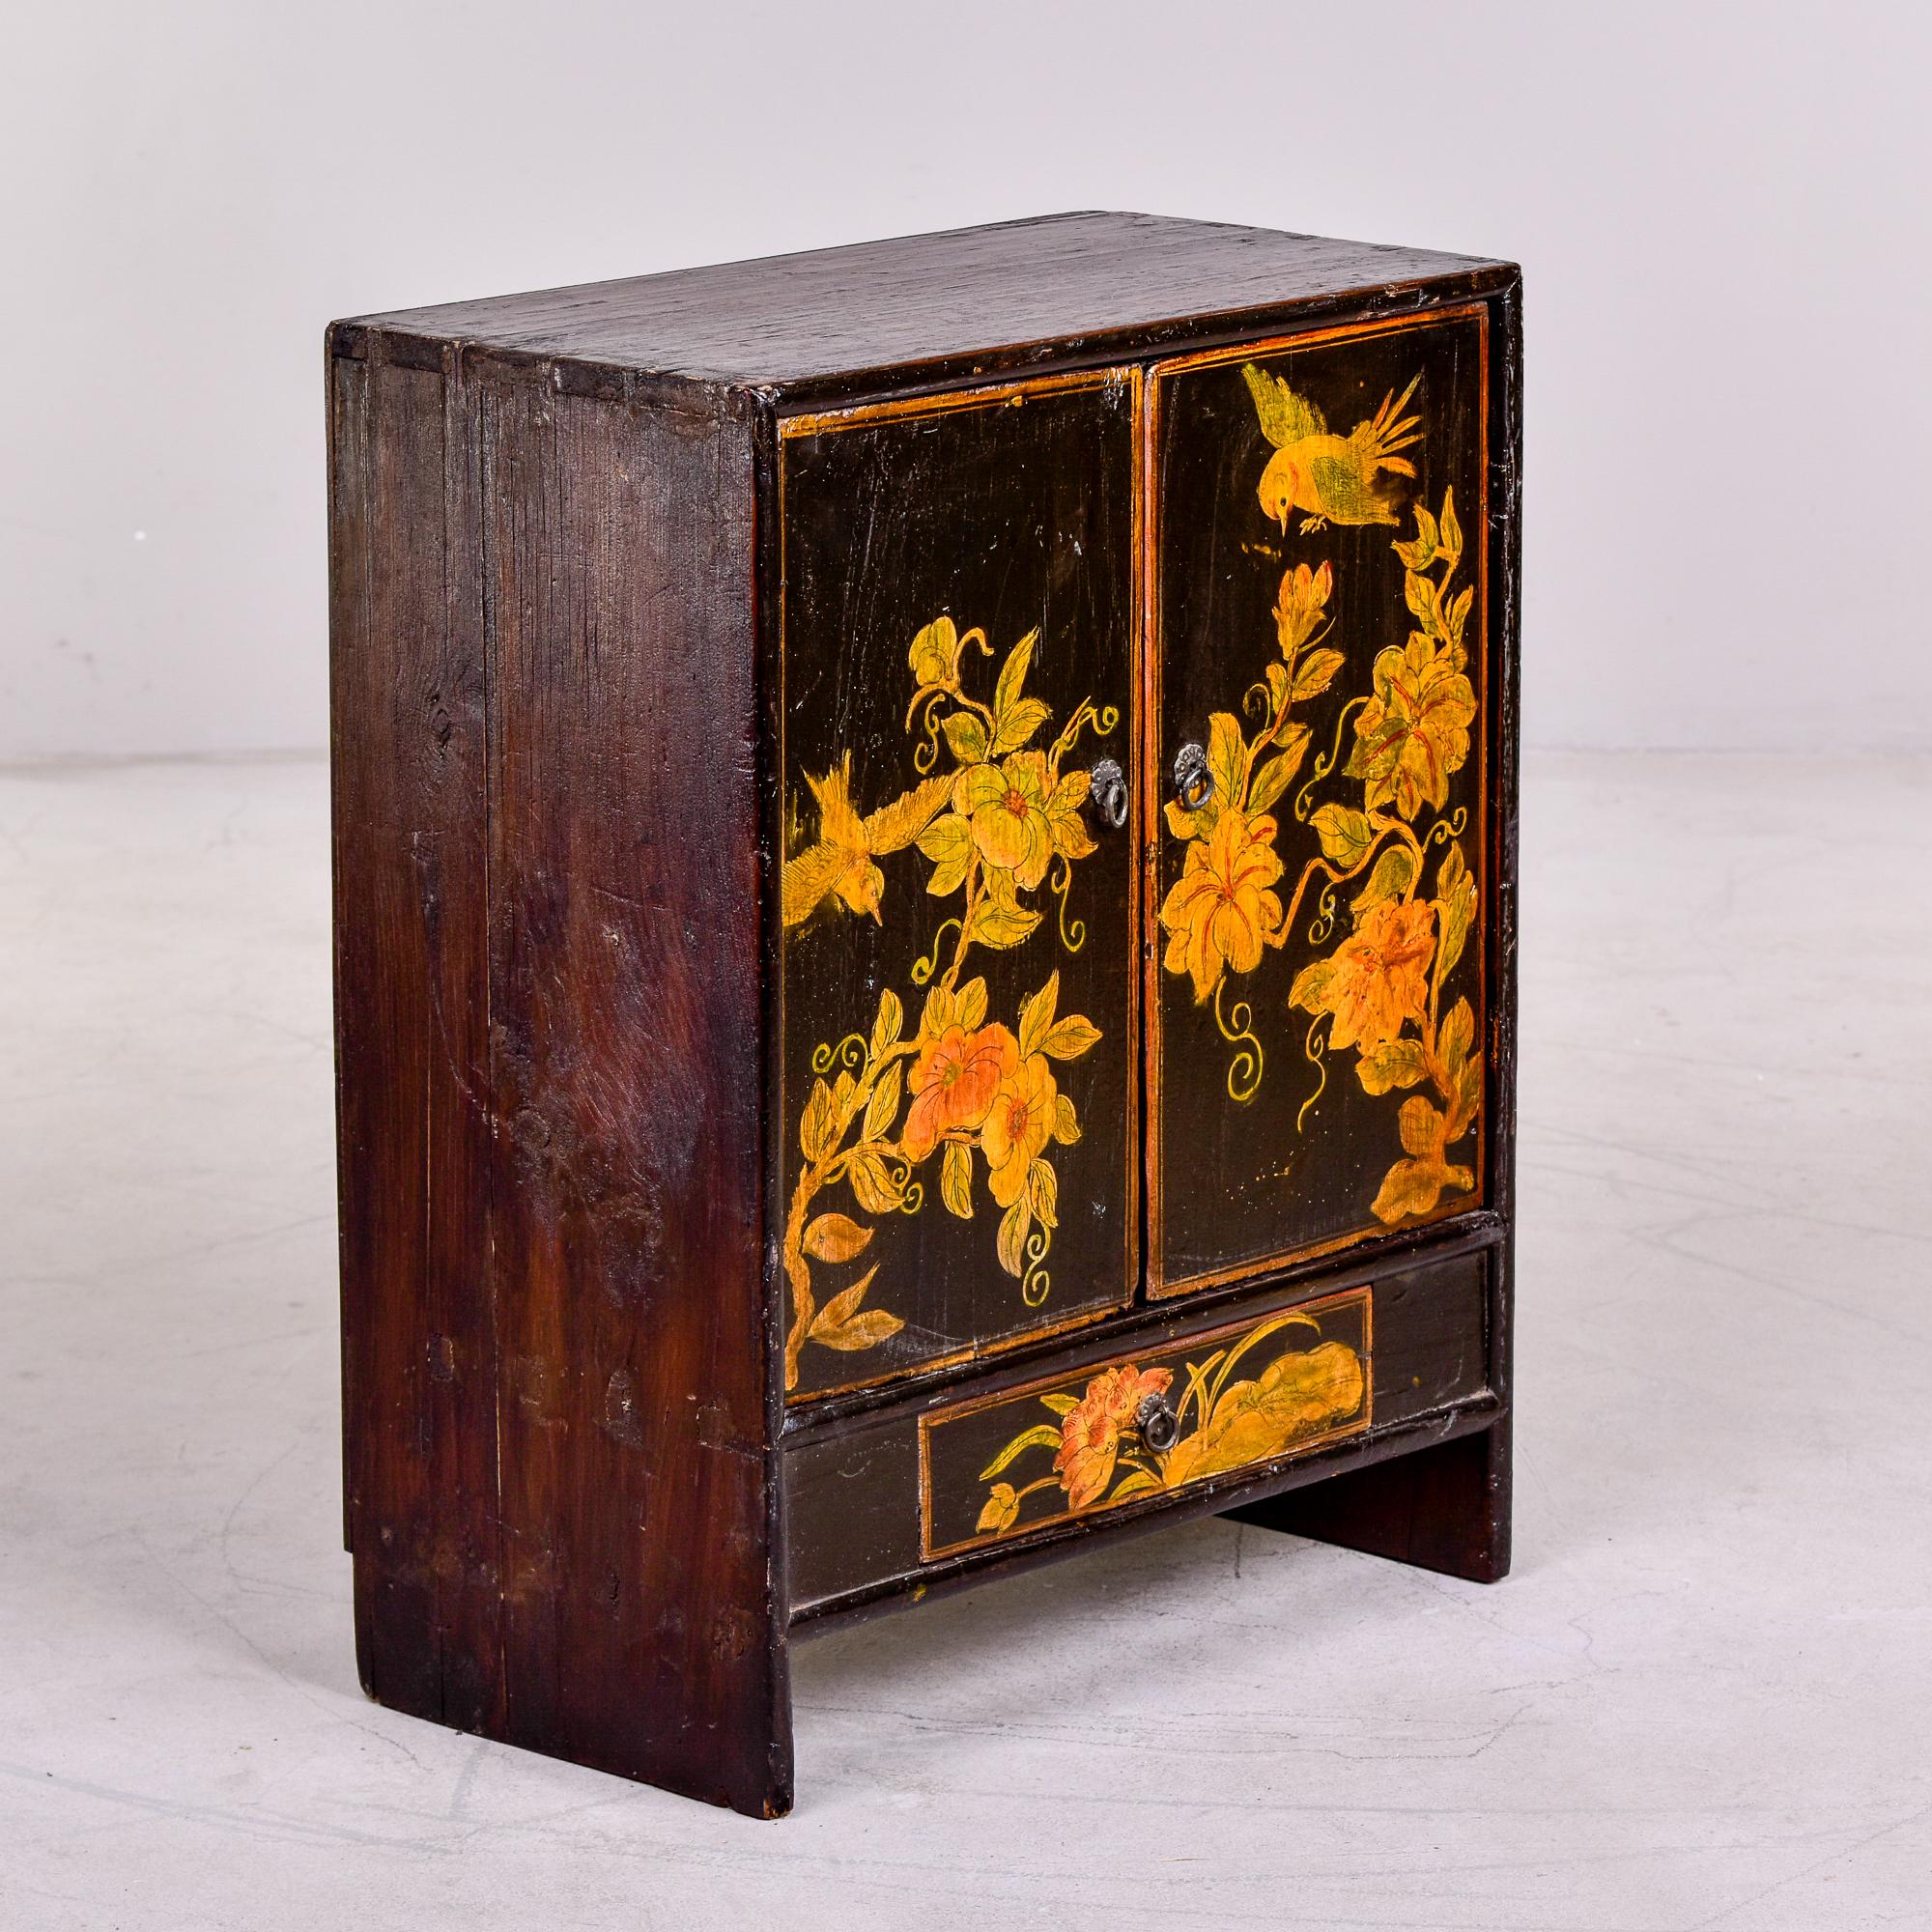 Circa 1910 small wood Chinese cabinet with two front hinged doors, single drawer at the bottom and one internal shelf. Hand painted with birds and flowers. Dovetail and mortis and tenon construction.